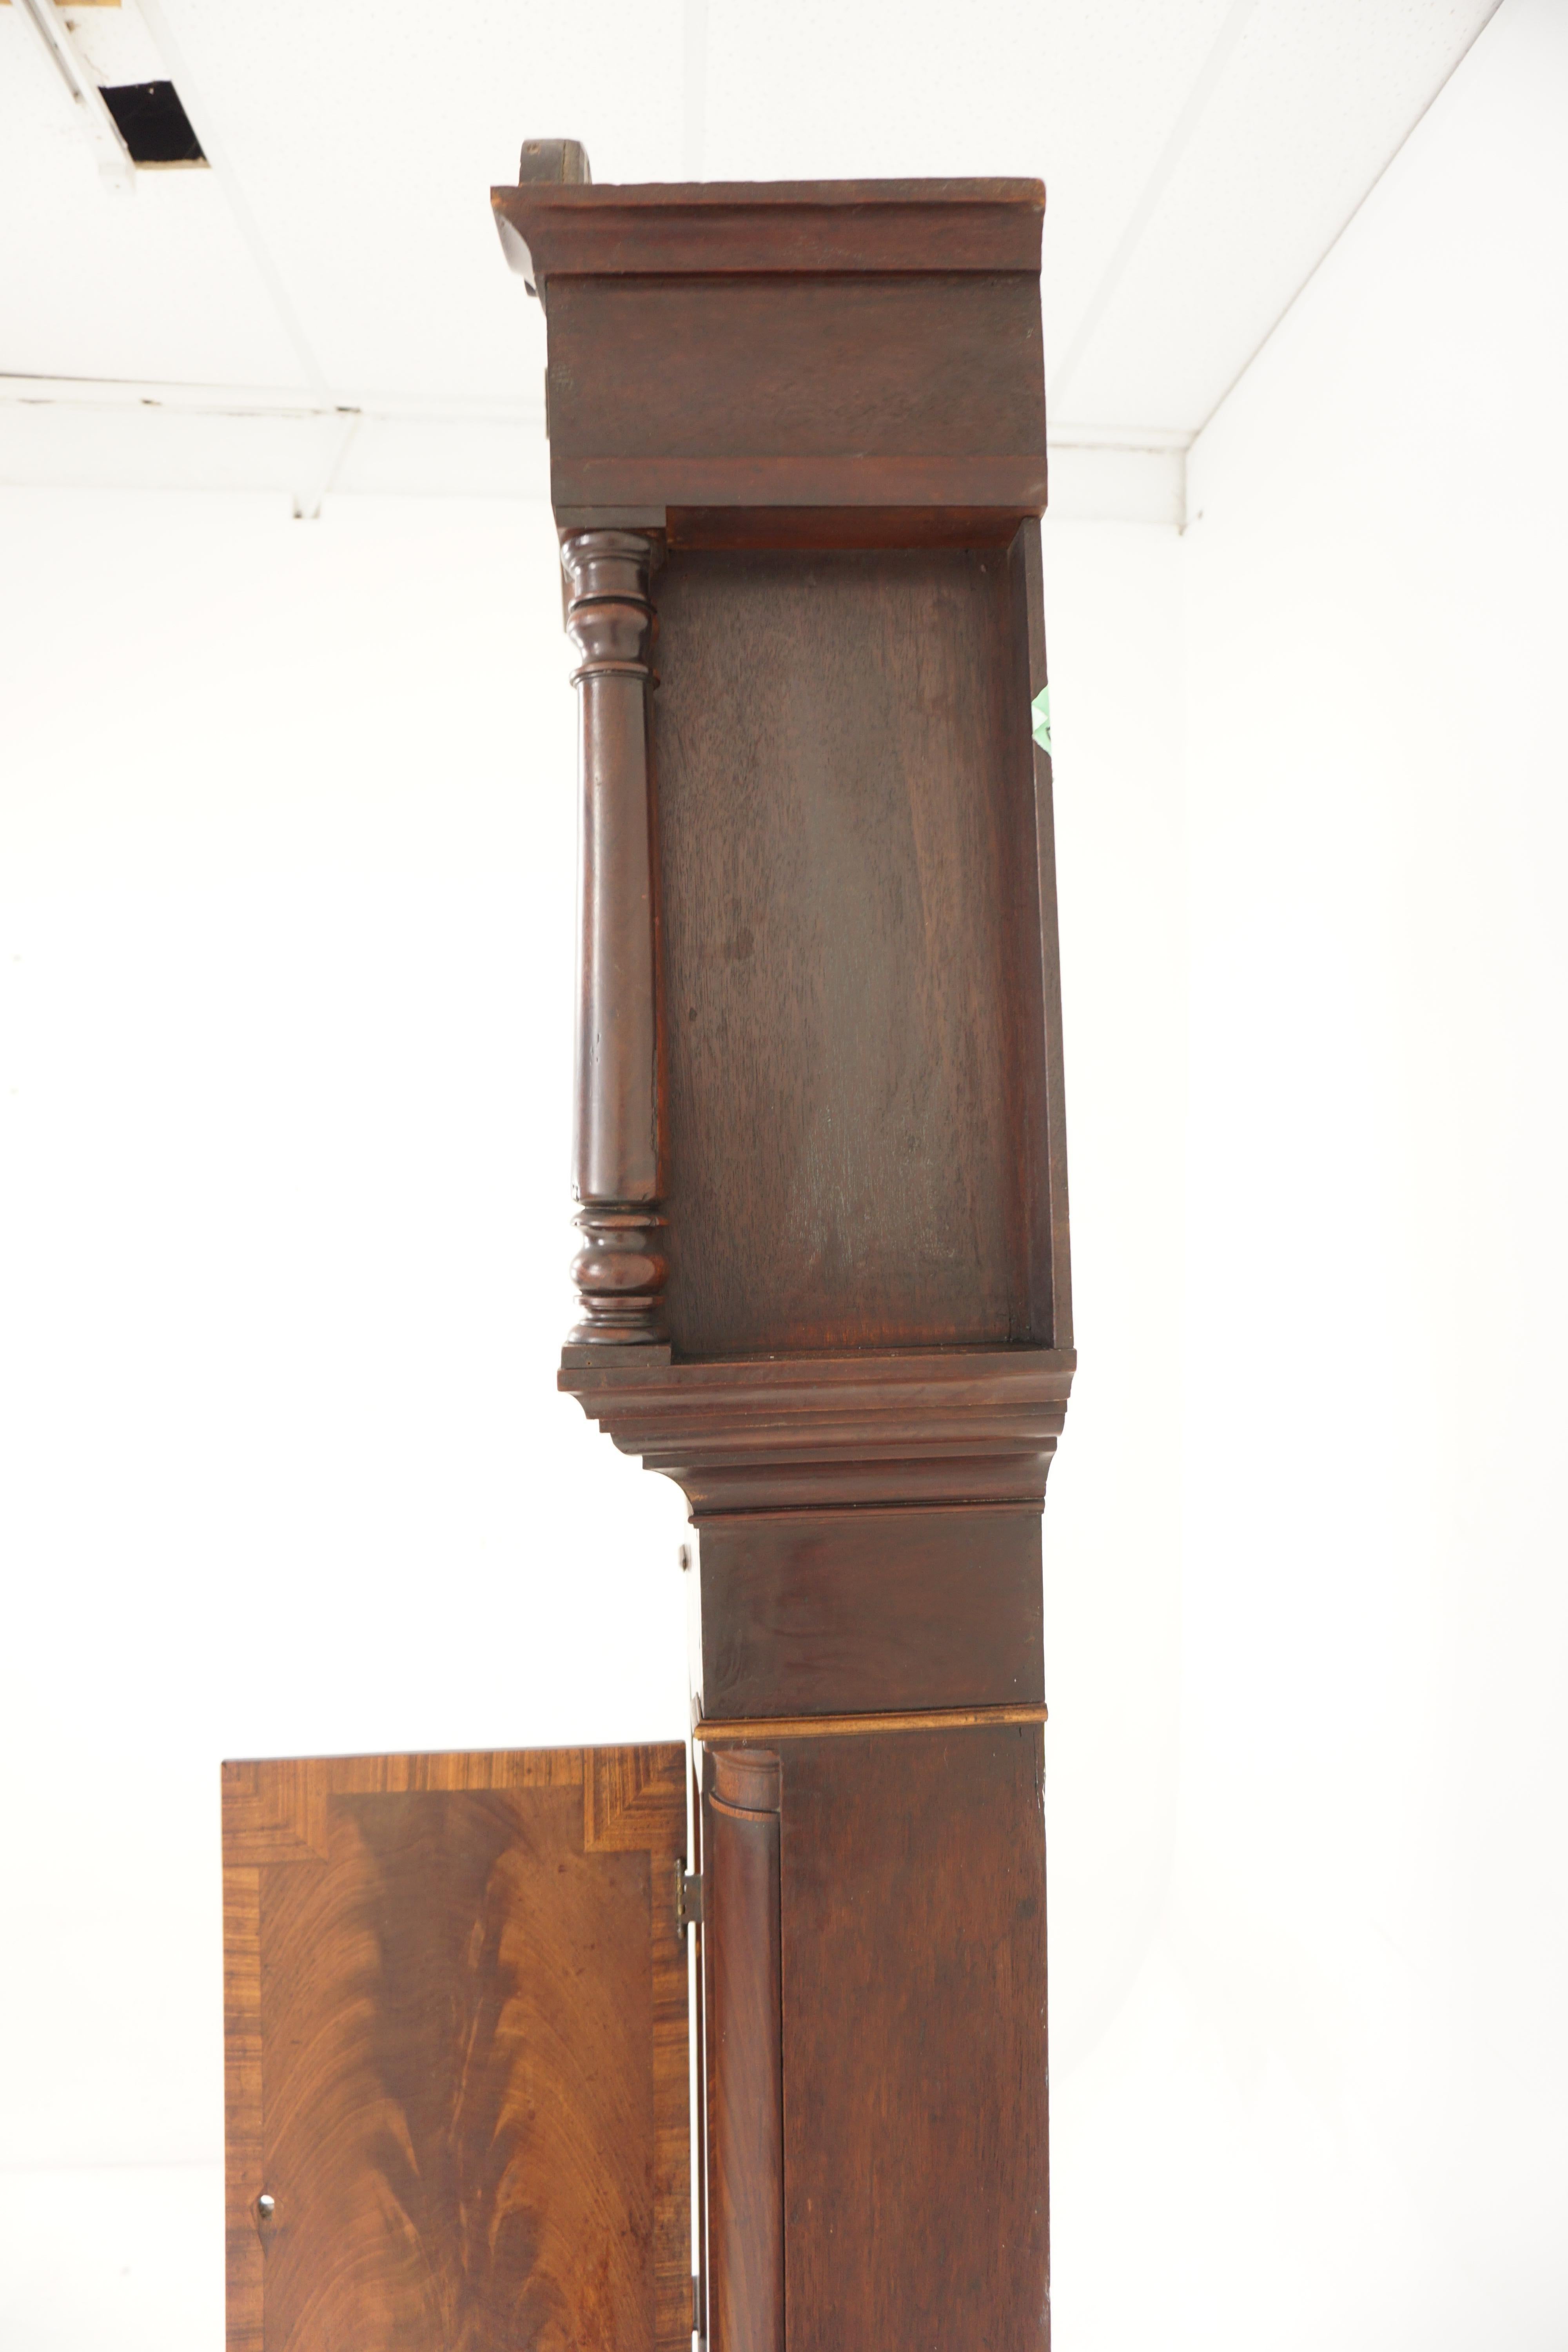 Victorian Grandfather Long Case Clock by Jolliffe of Portsea, England 1870, H061 6